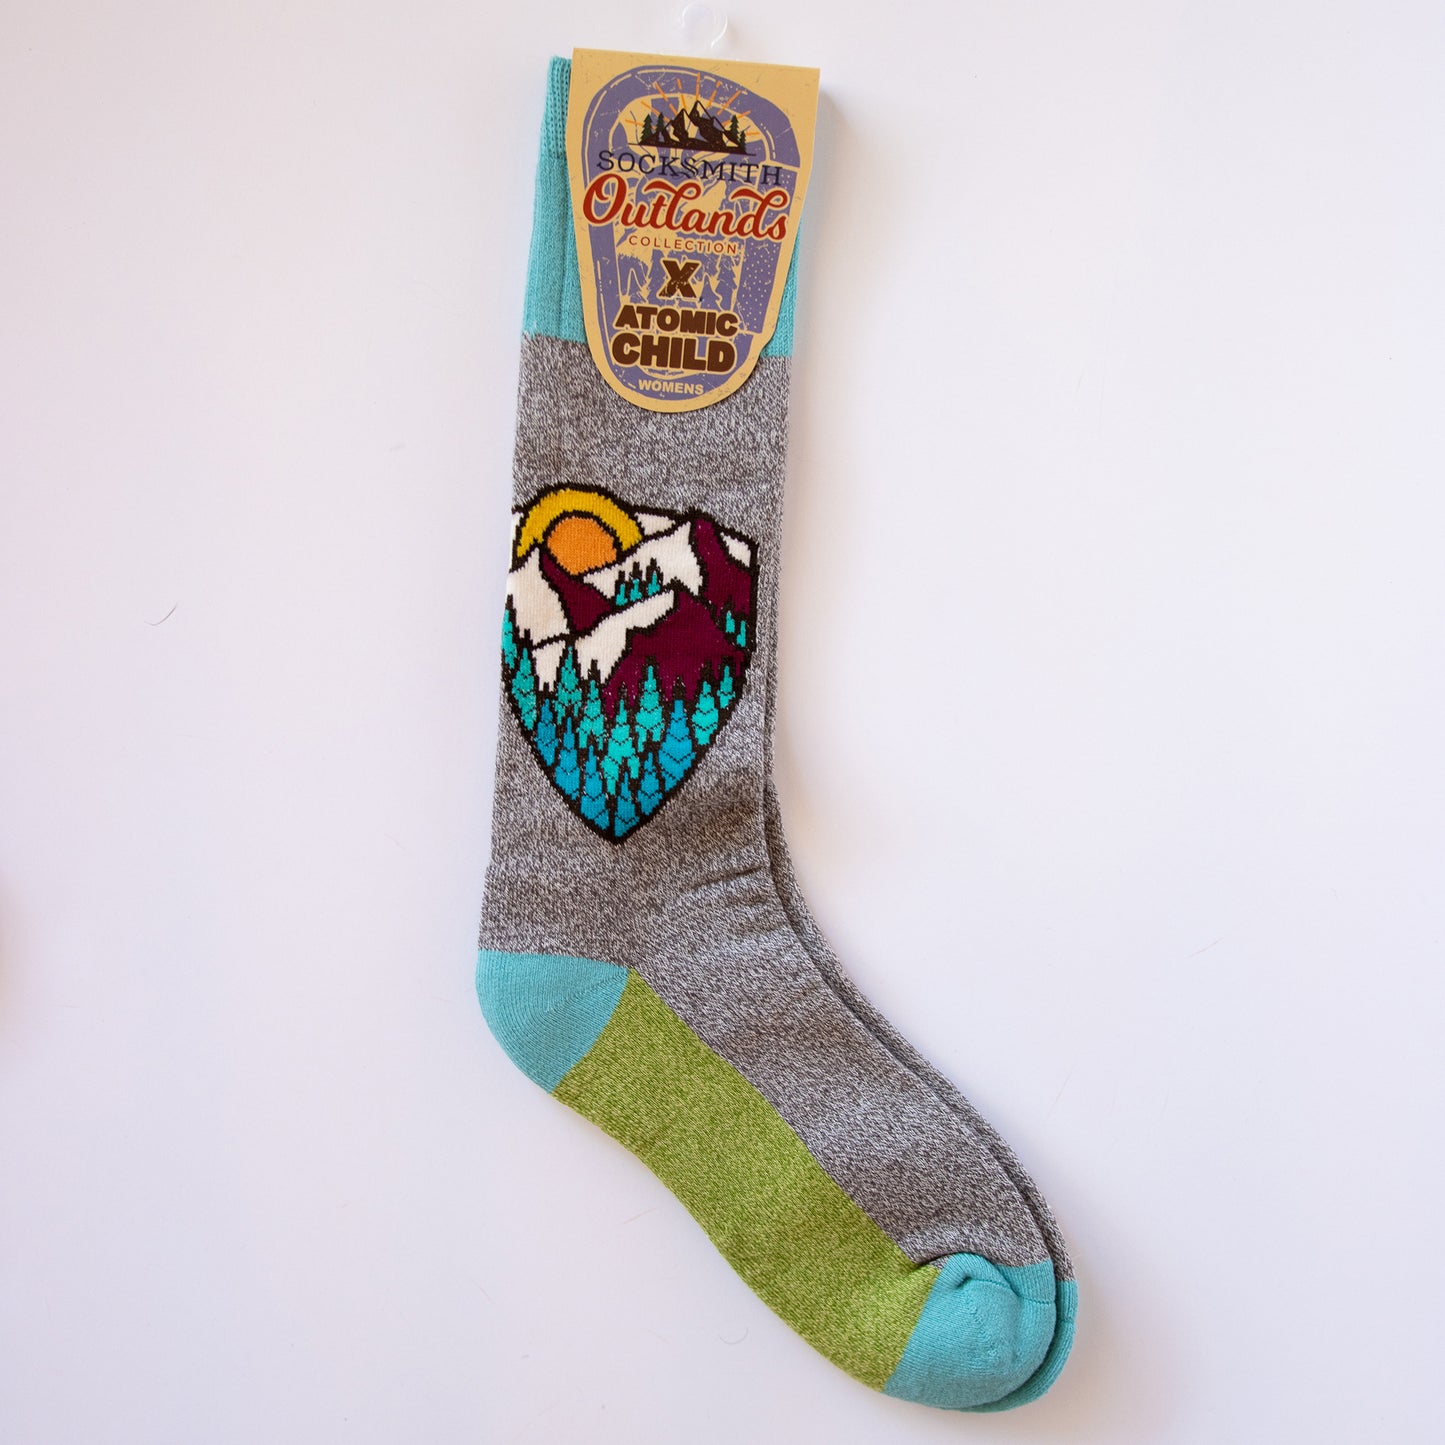 Womens mountain socks, multi-color with mountain scenes